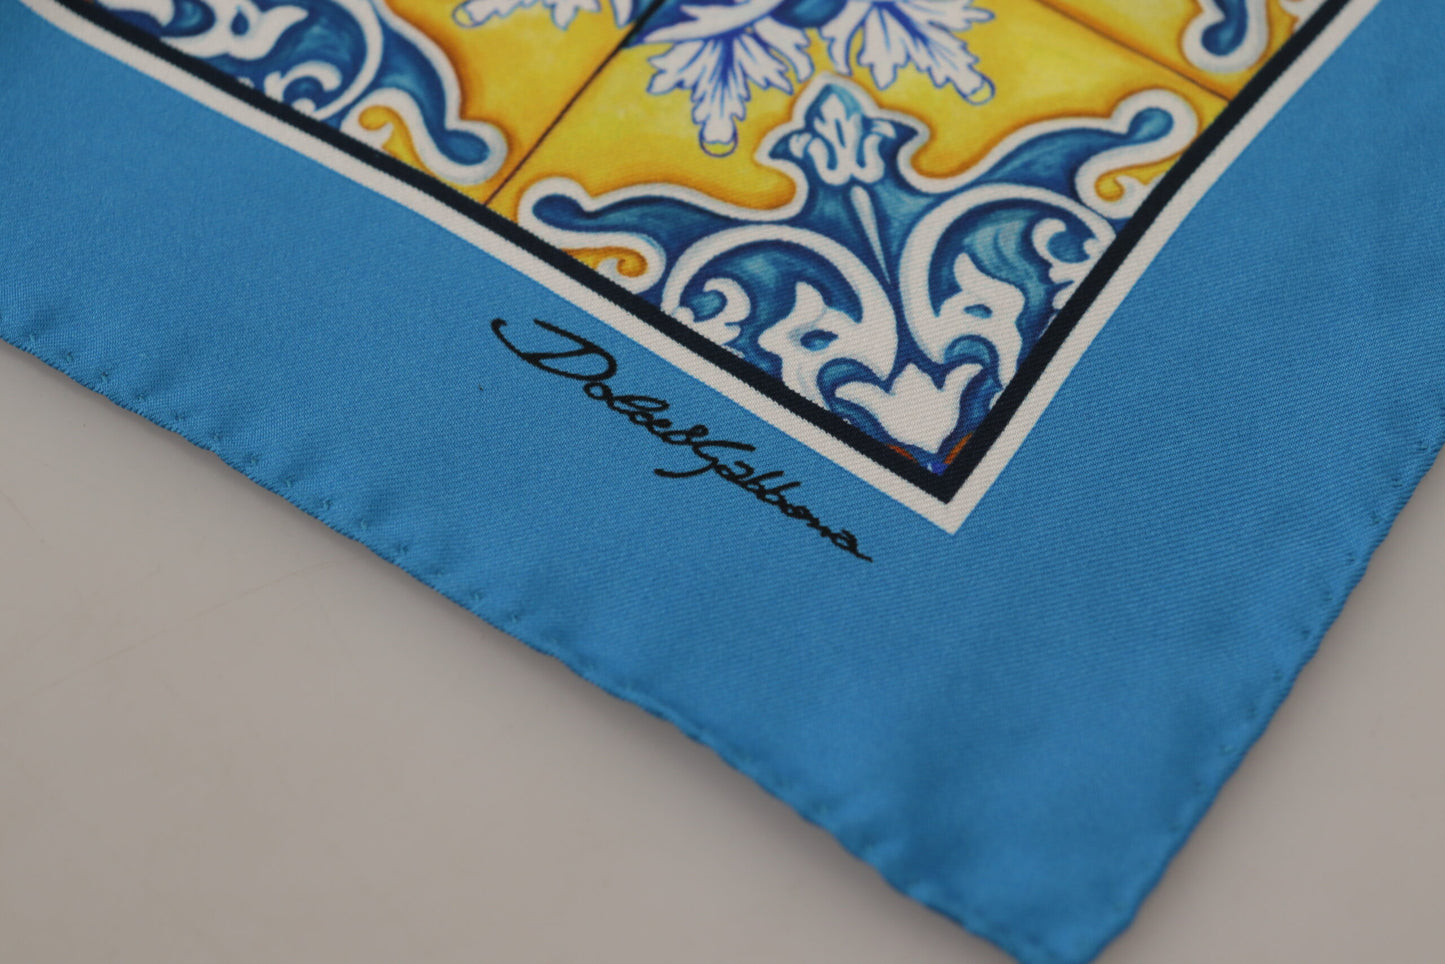 Blue Majolica Pattern Square Handkerchief Scarf - Designed by Dolce & Gabbana Available to Buy at a Discounted Price on Moon Behind The Hill Online Designer Discount Store